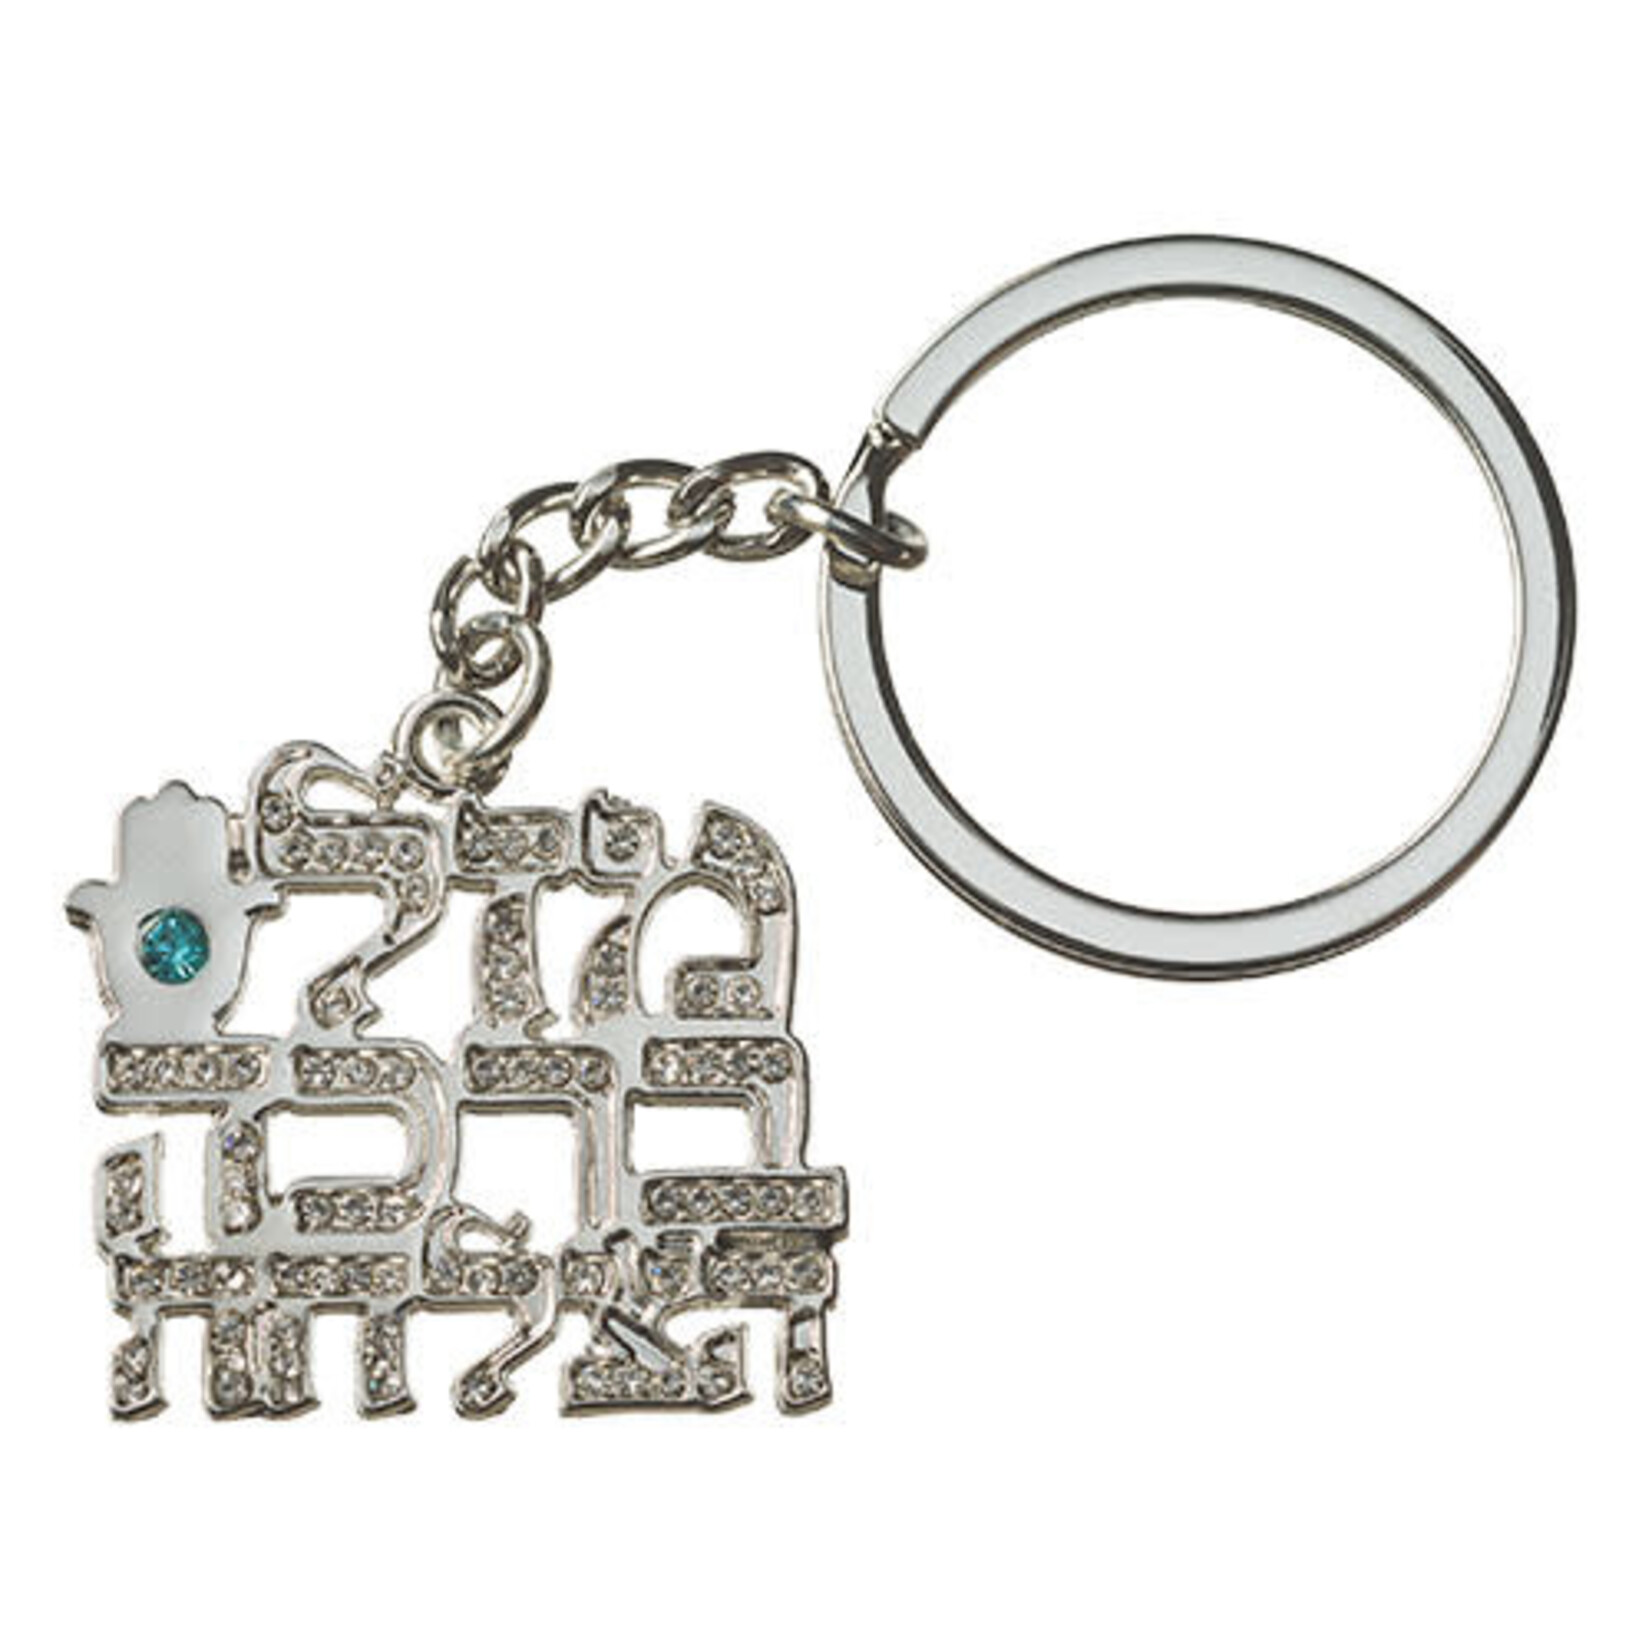 Keychain with Blessings